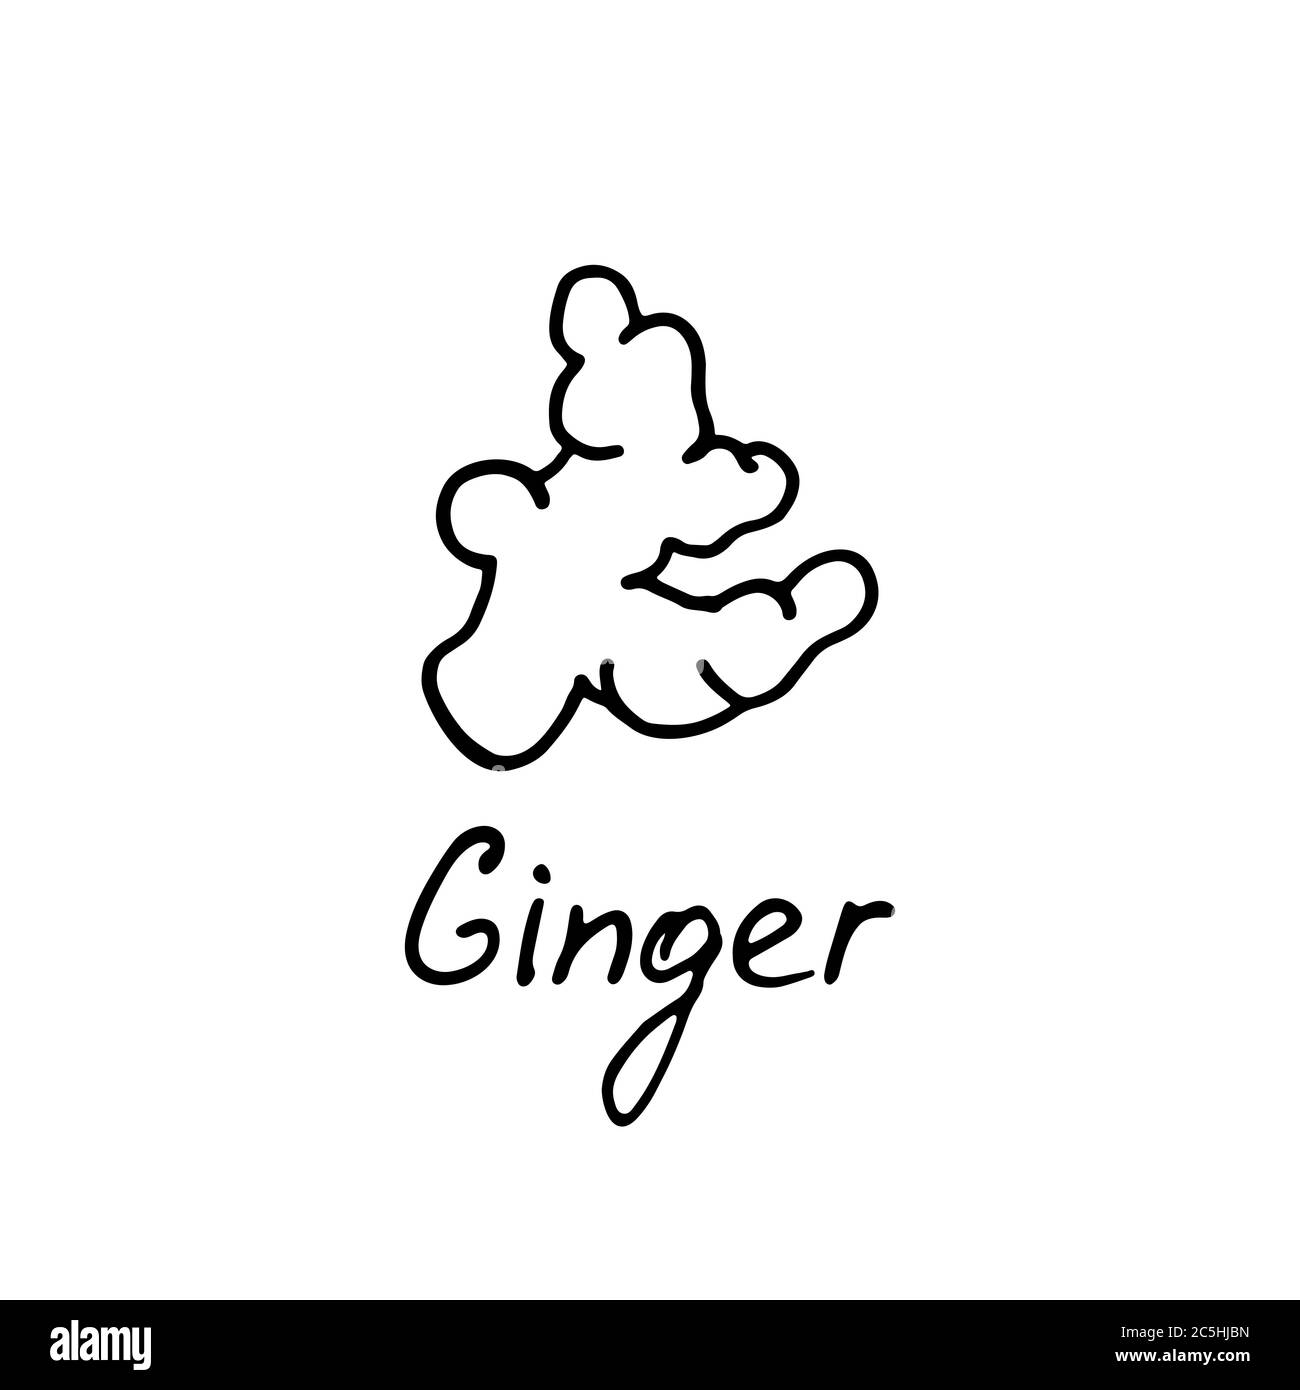 Ginger logo. Vector illustration with hand drawn ginger. Stock Vector